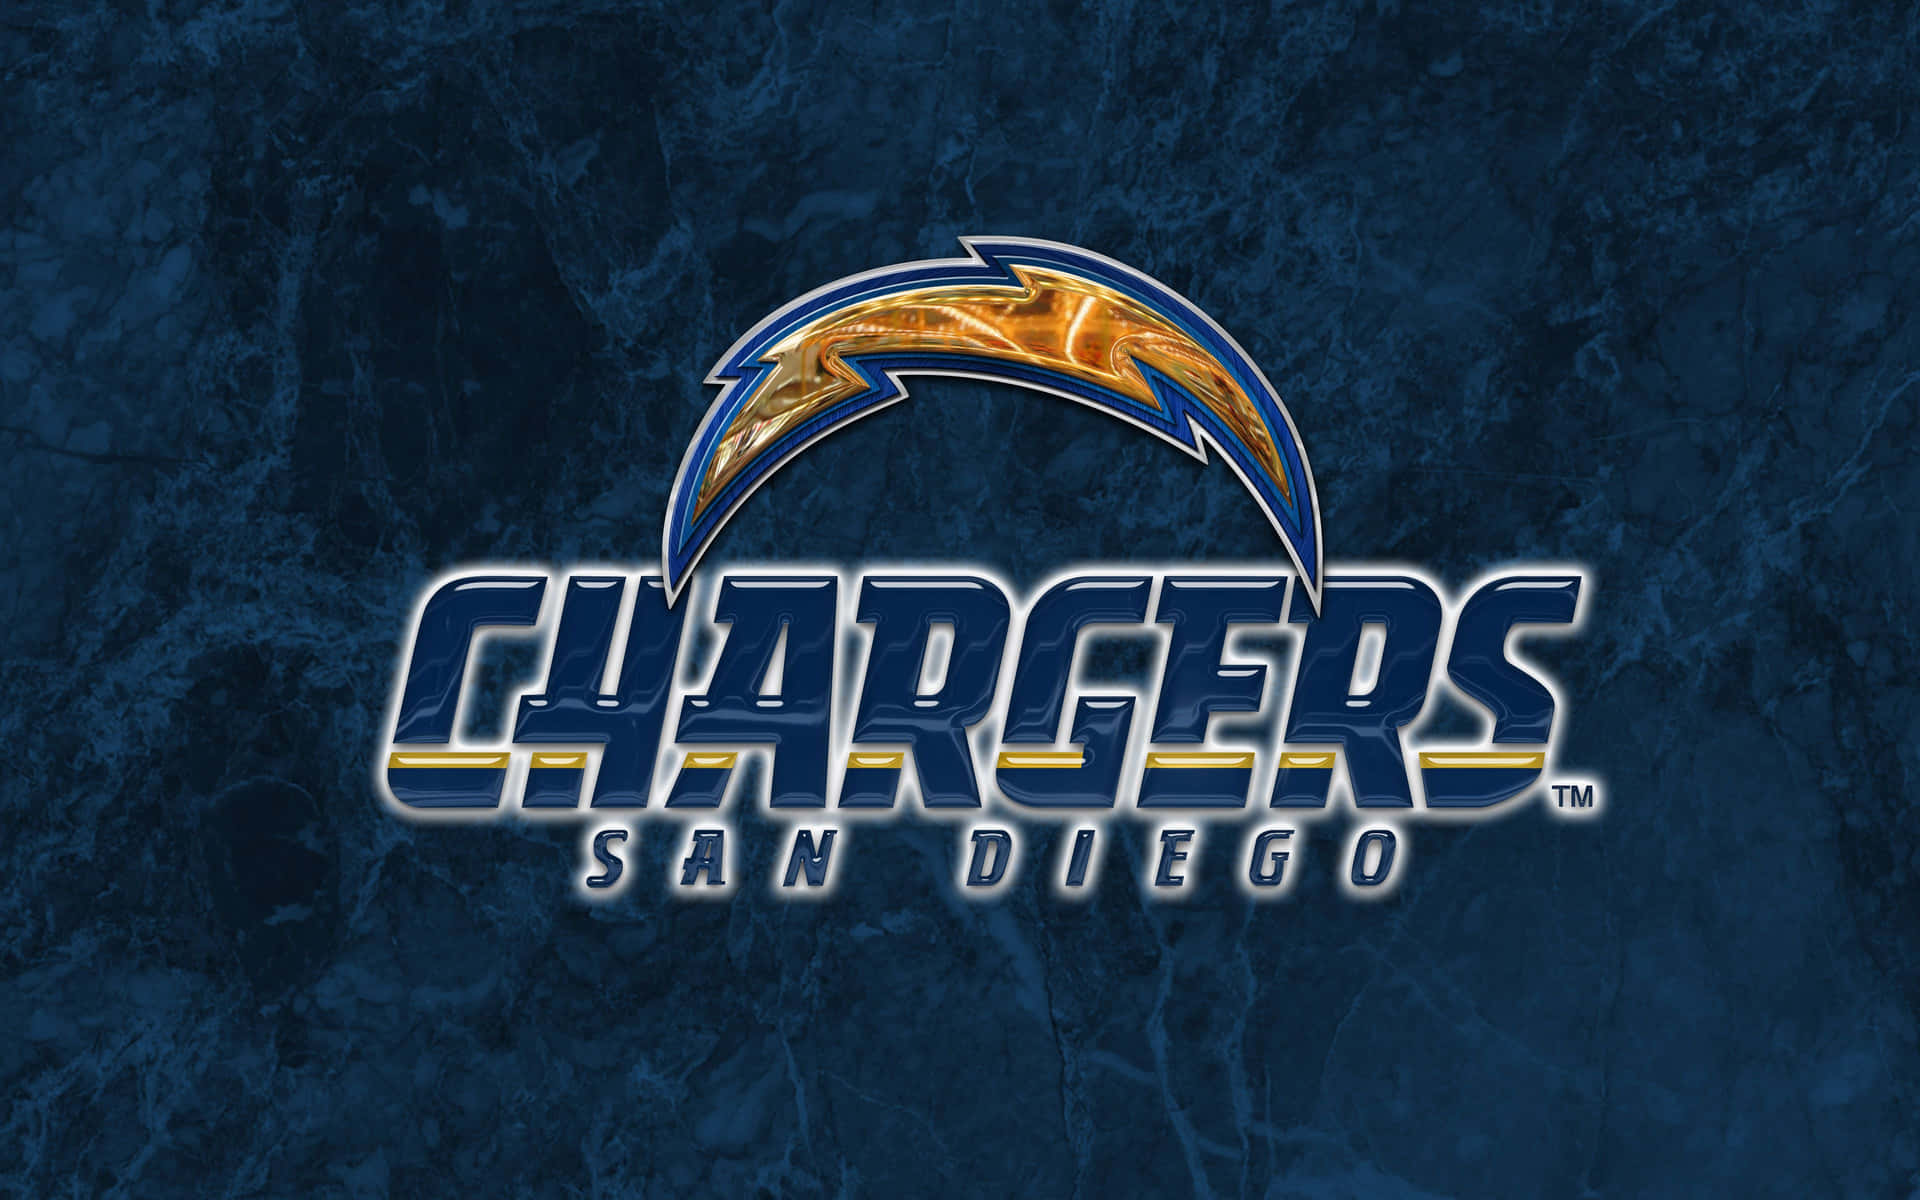 The San Diego Chargers dominate the gridiron Wallpaper